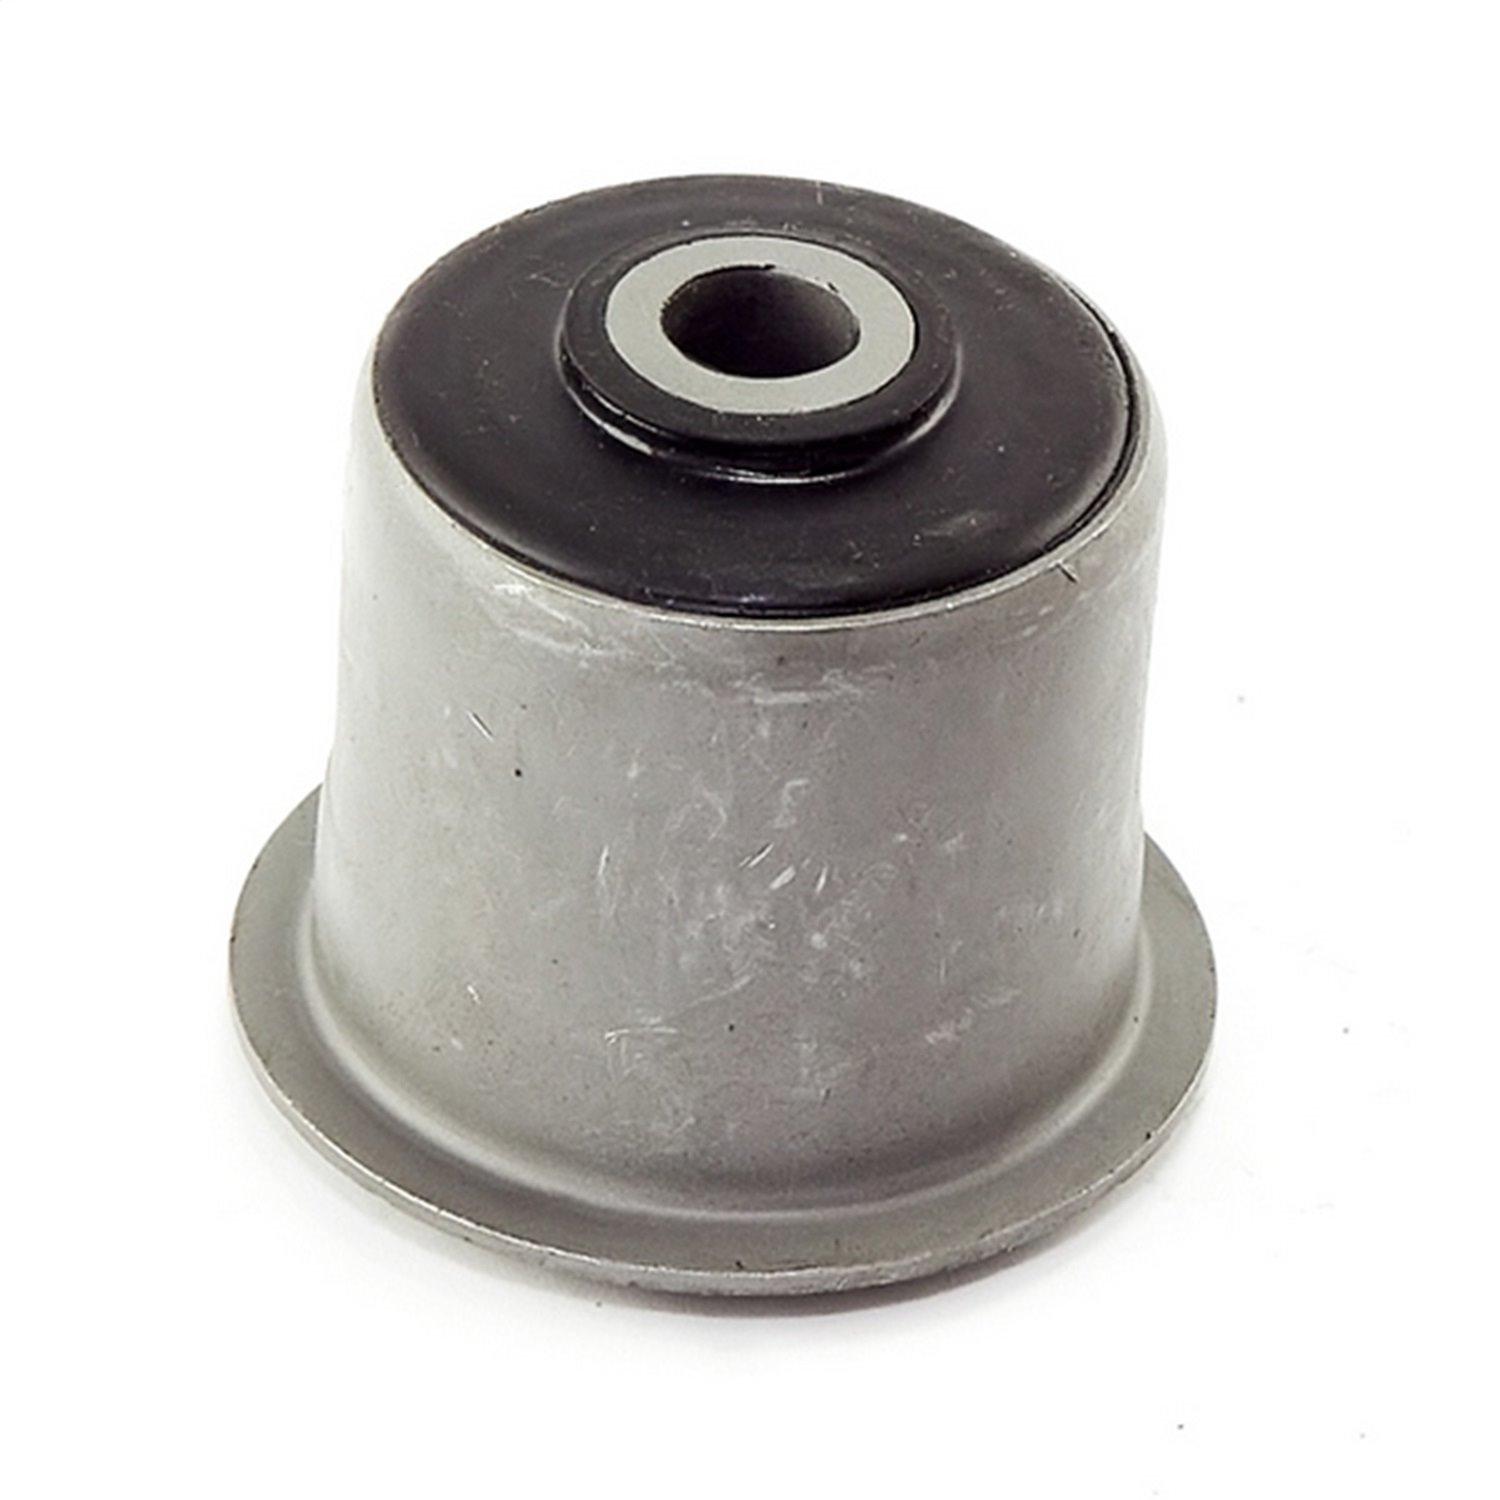 Replacement upper control arm bushing from Omix-ADA, Fits